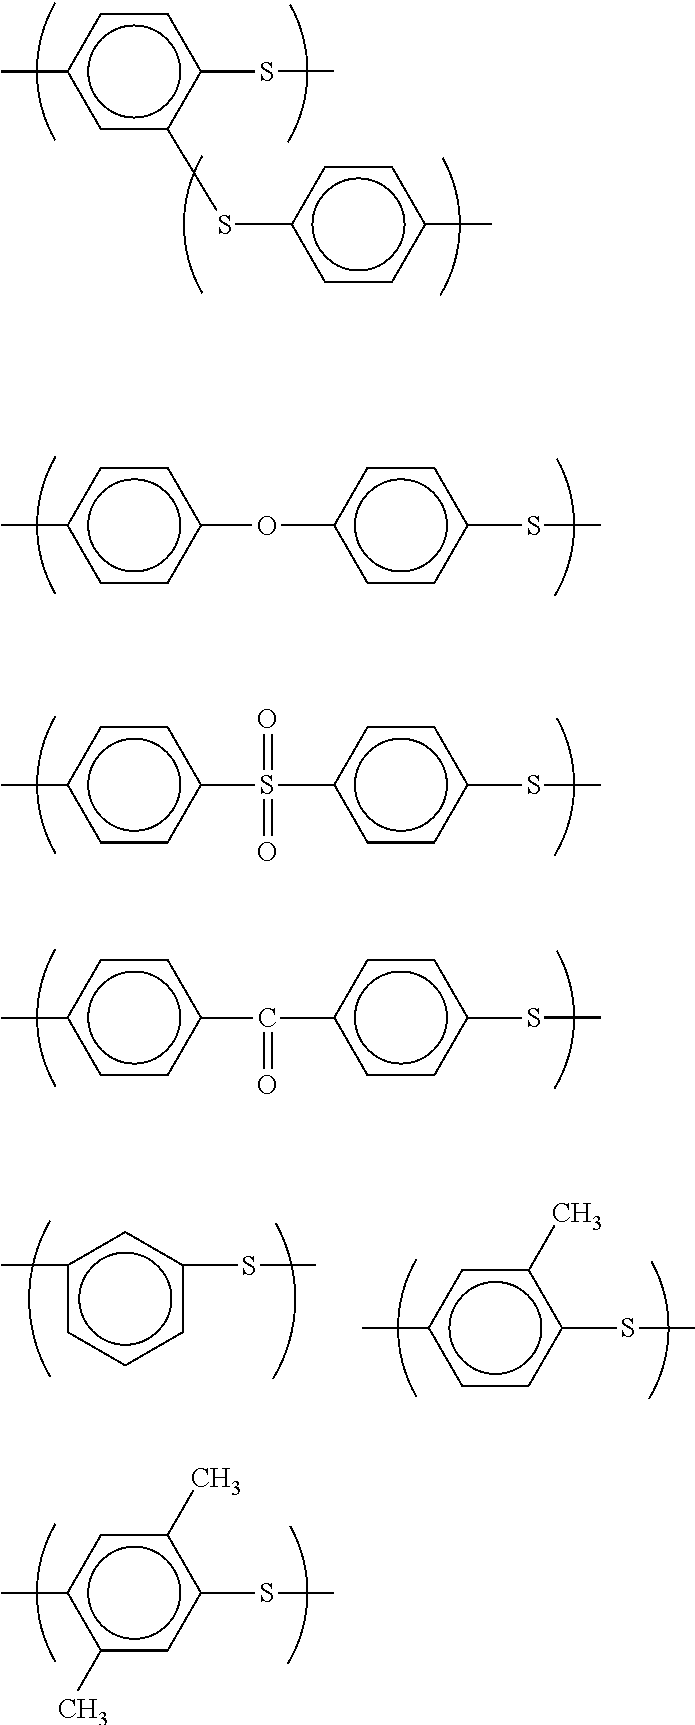 Polyphenylene sulfide resin composition and molding comprising same